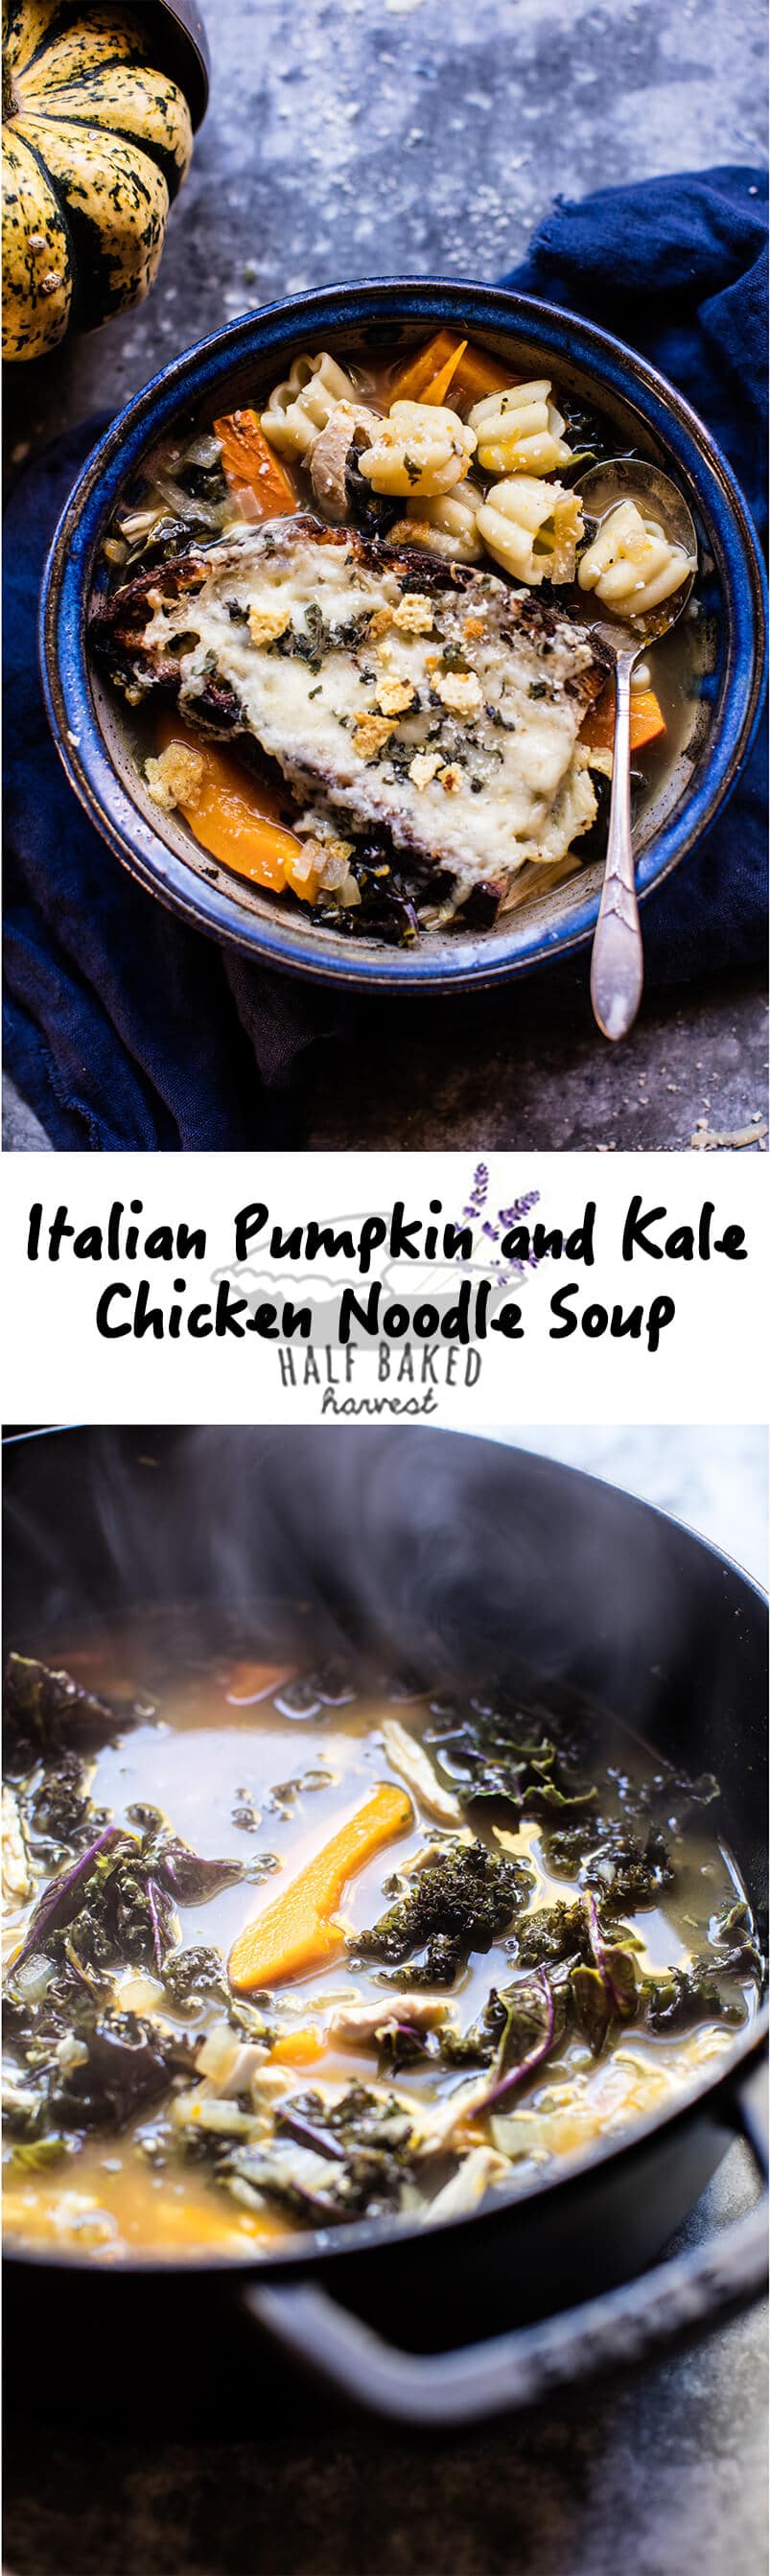 Italian Pumpkin and Kale Chicken Noodle Soup with Fontina Toast | halfbakedharvest.com @hbharvest